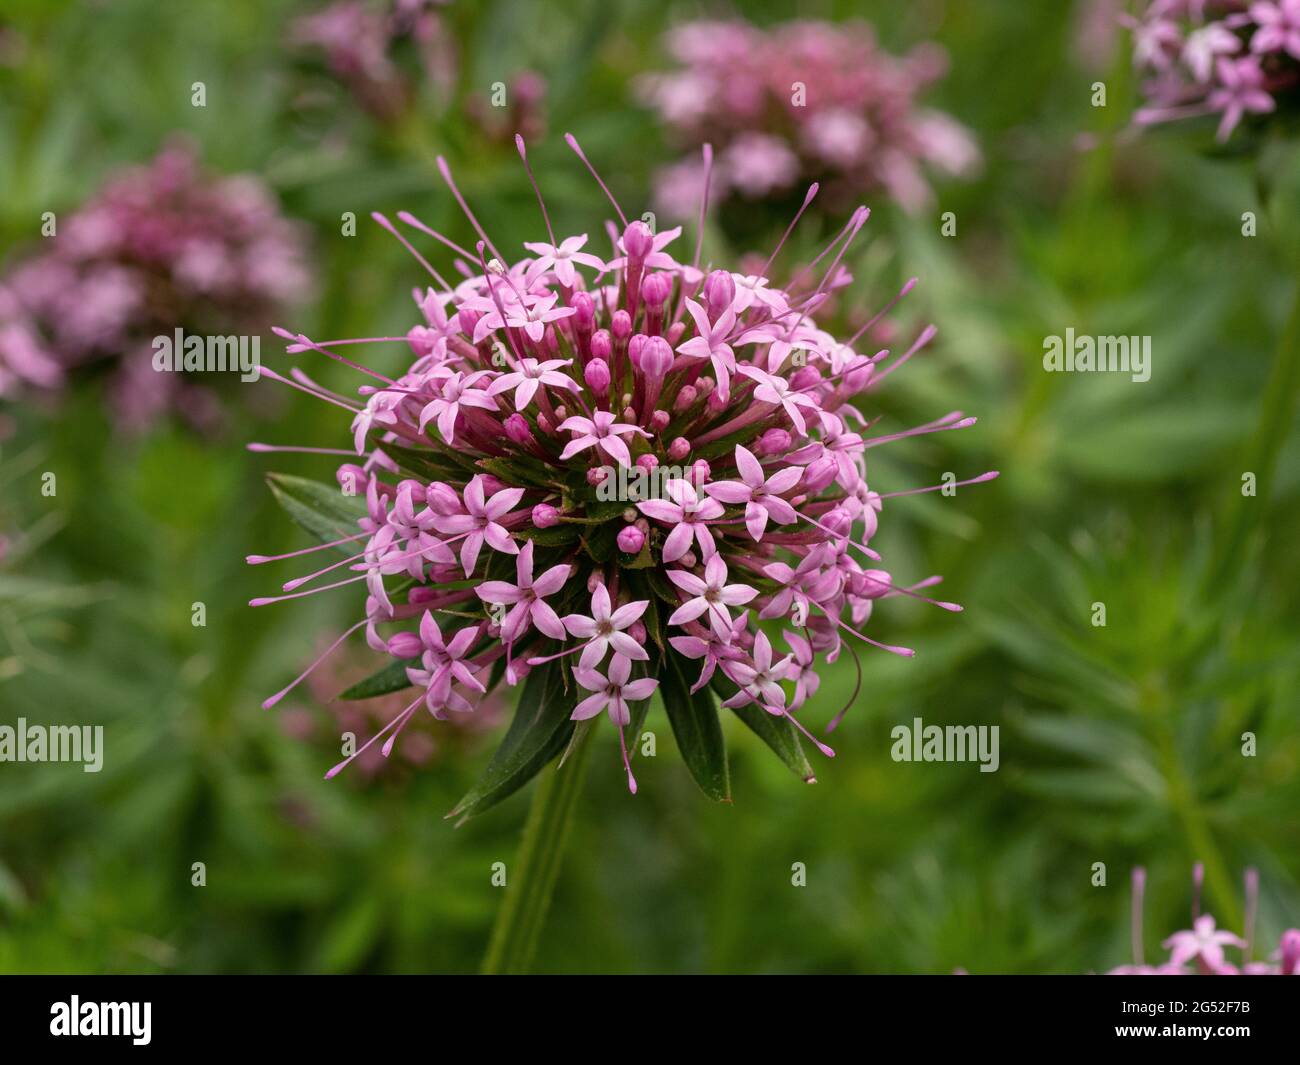 A close up of a single pink flowerhead of Phuopsis stylosa Stock Photo